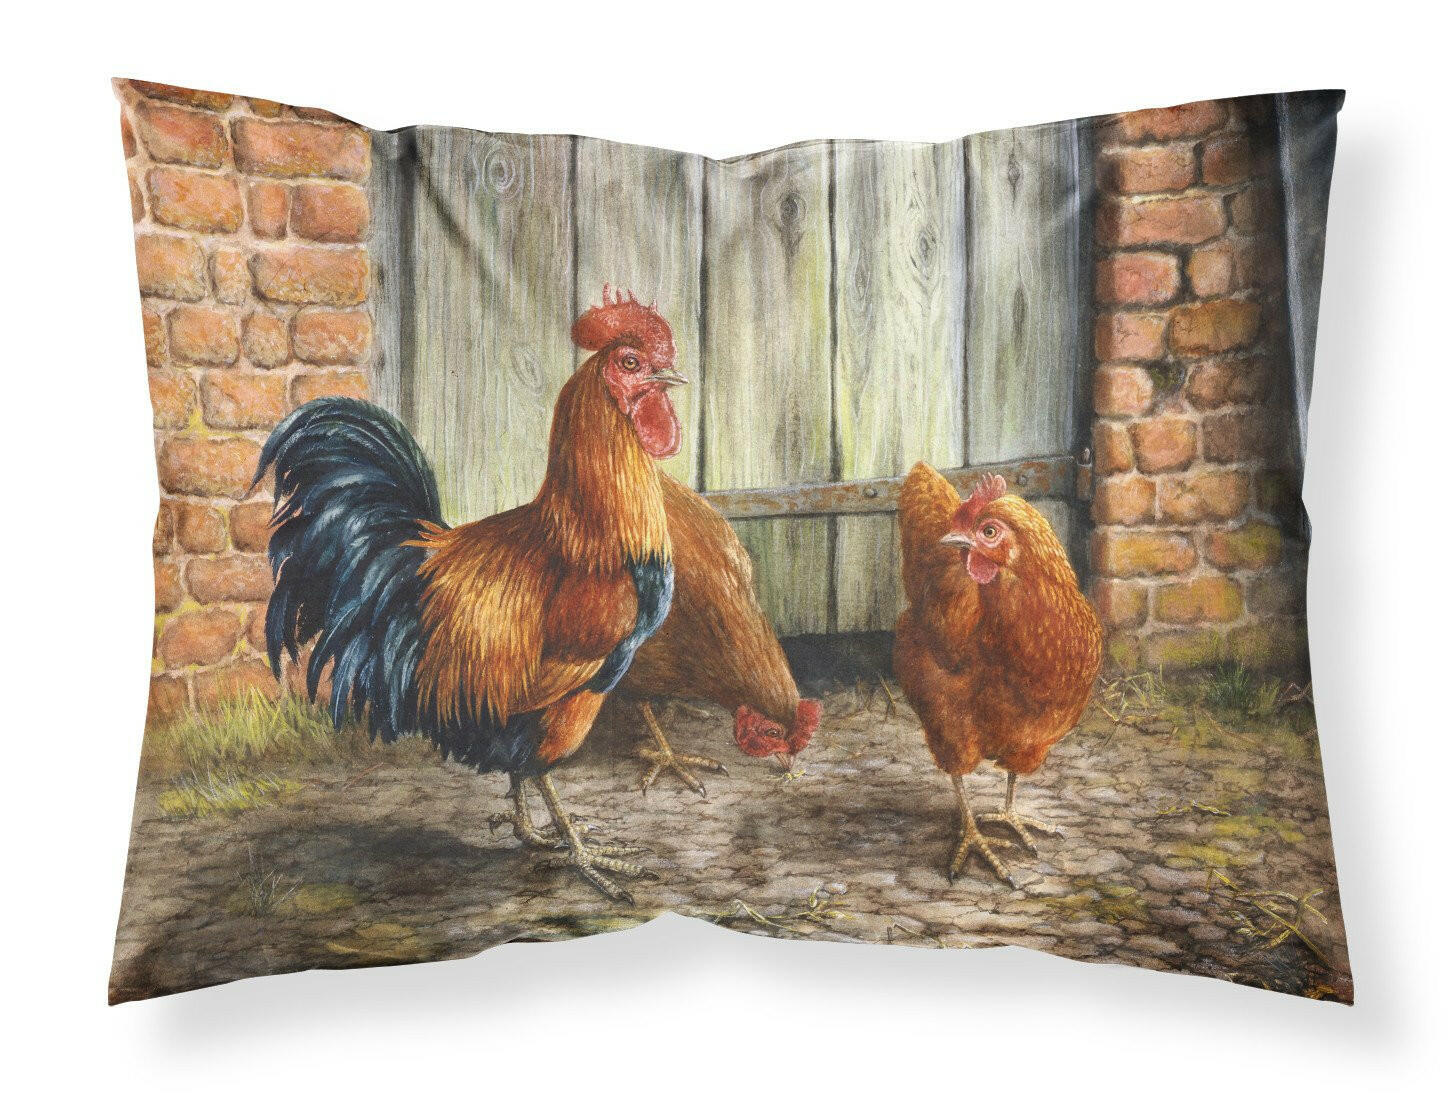 Rooster and Chickens by Daphne Baxter Fabric Standard Pillowcase BDBA0056PILLOWCASE by Caroline's Treasures